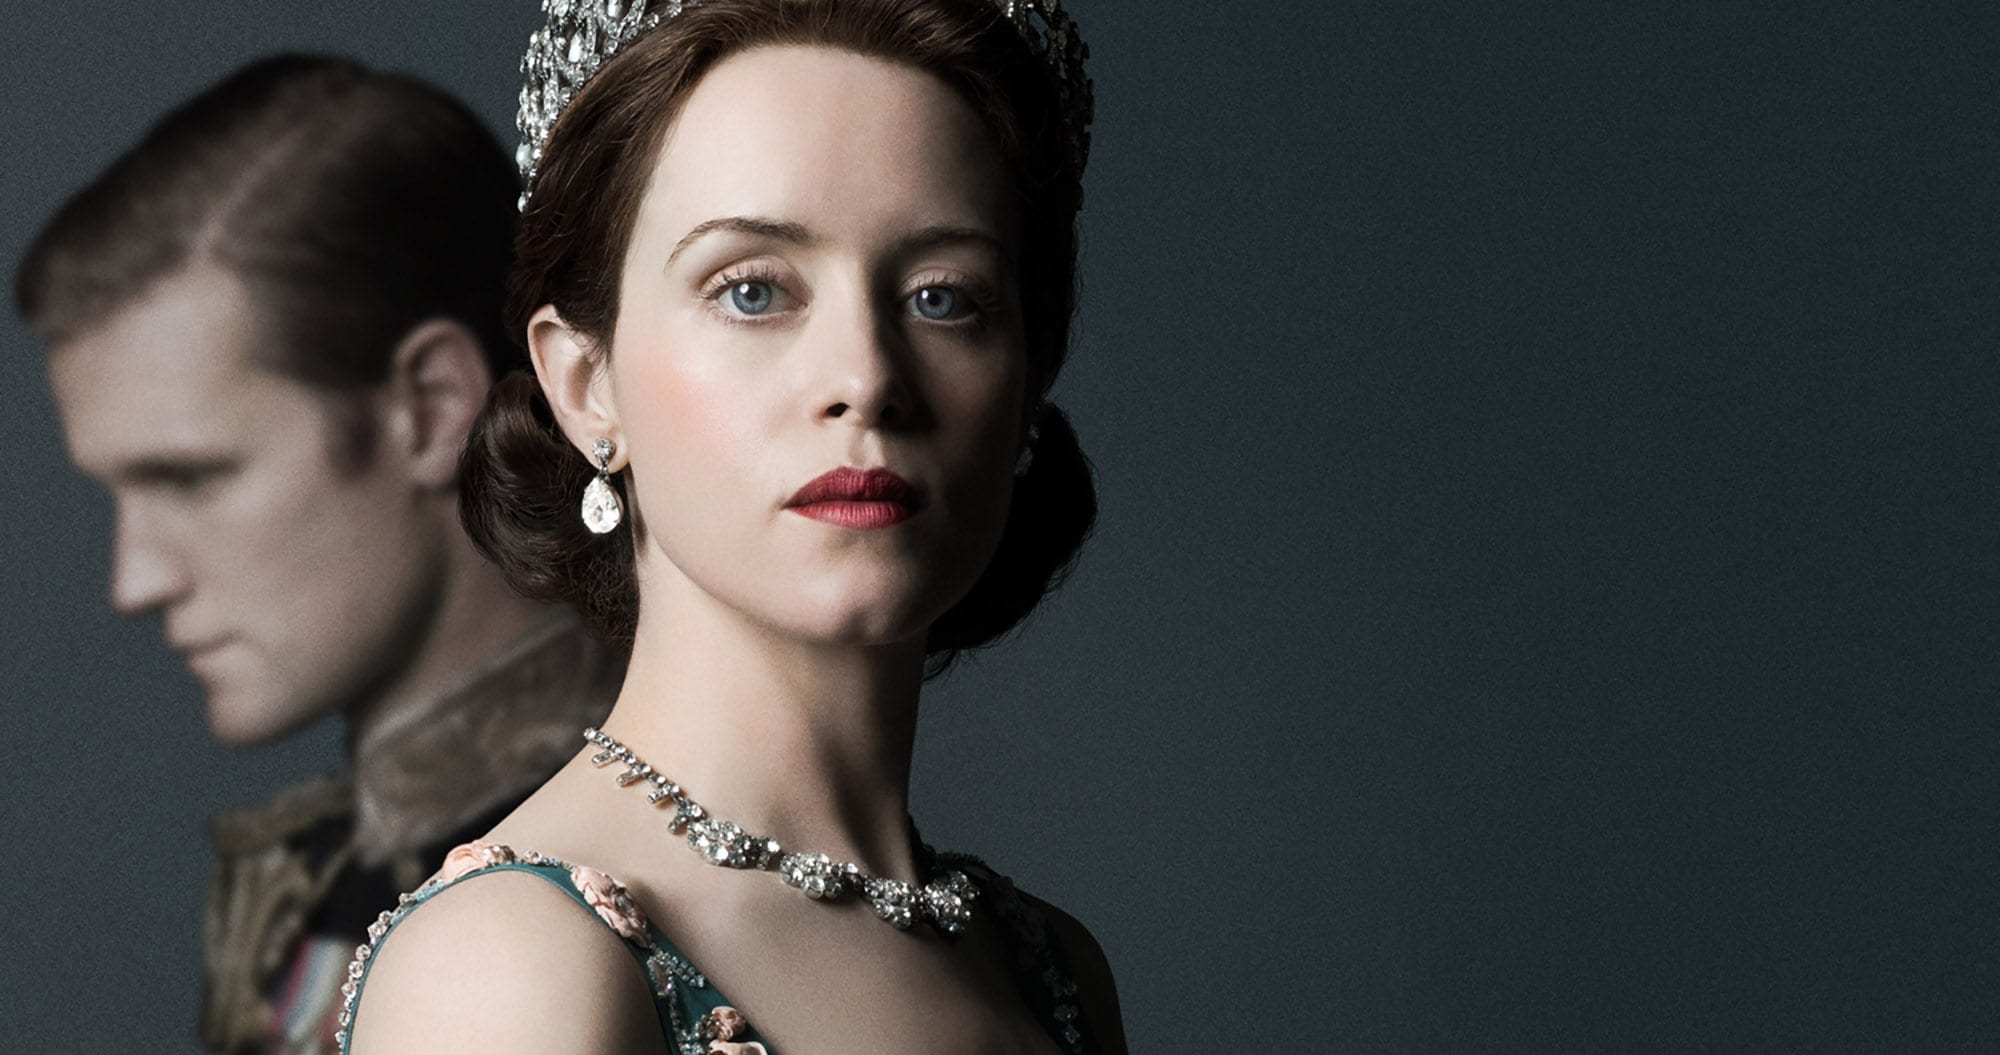 It seems even the Queen can be subjected to pay inequality. During a panel at the INTV Conference in Jerusalem on Tuesday, Netflix producers revealed Claire Foy – who played Queen Elizabeth in period drama 'The Crown' – was paid less than her co-star Matt Smith who portrayed her on-screen hubby, Prince Philip.